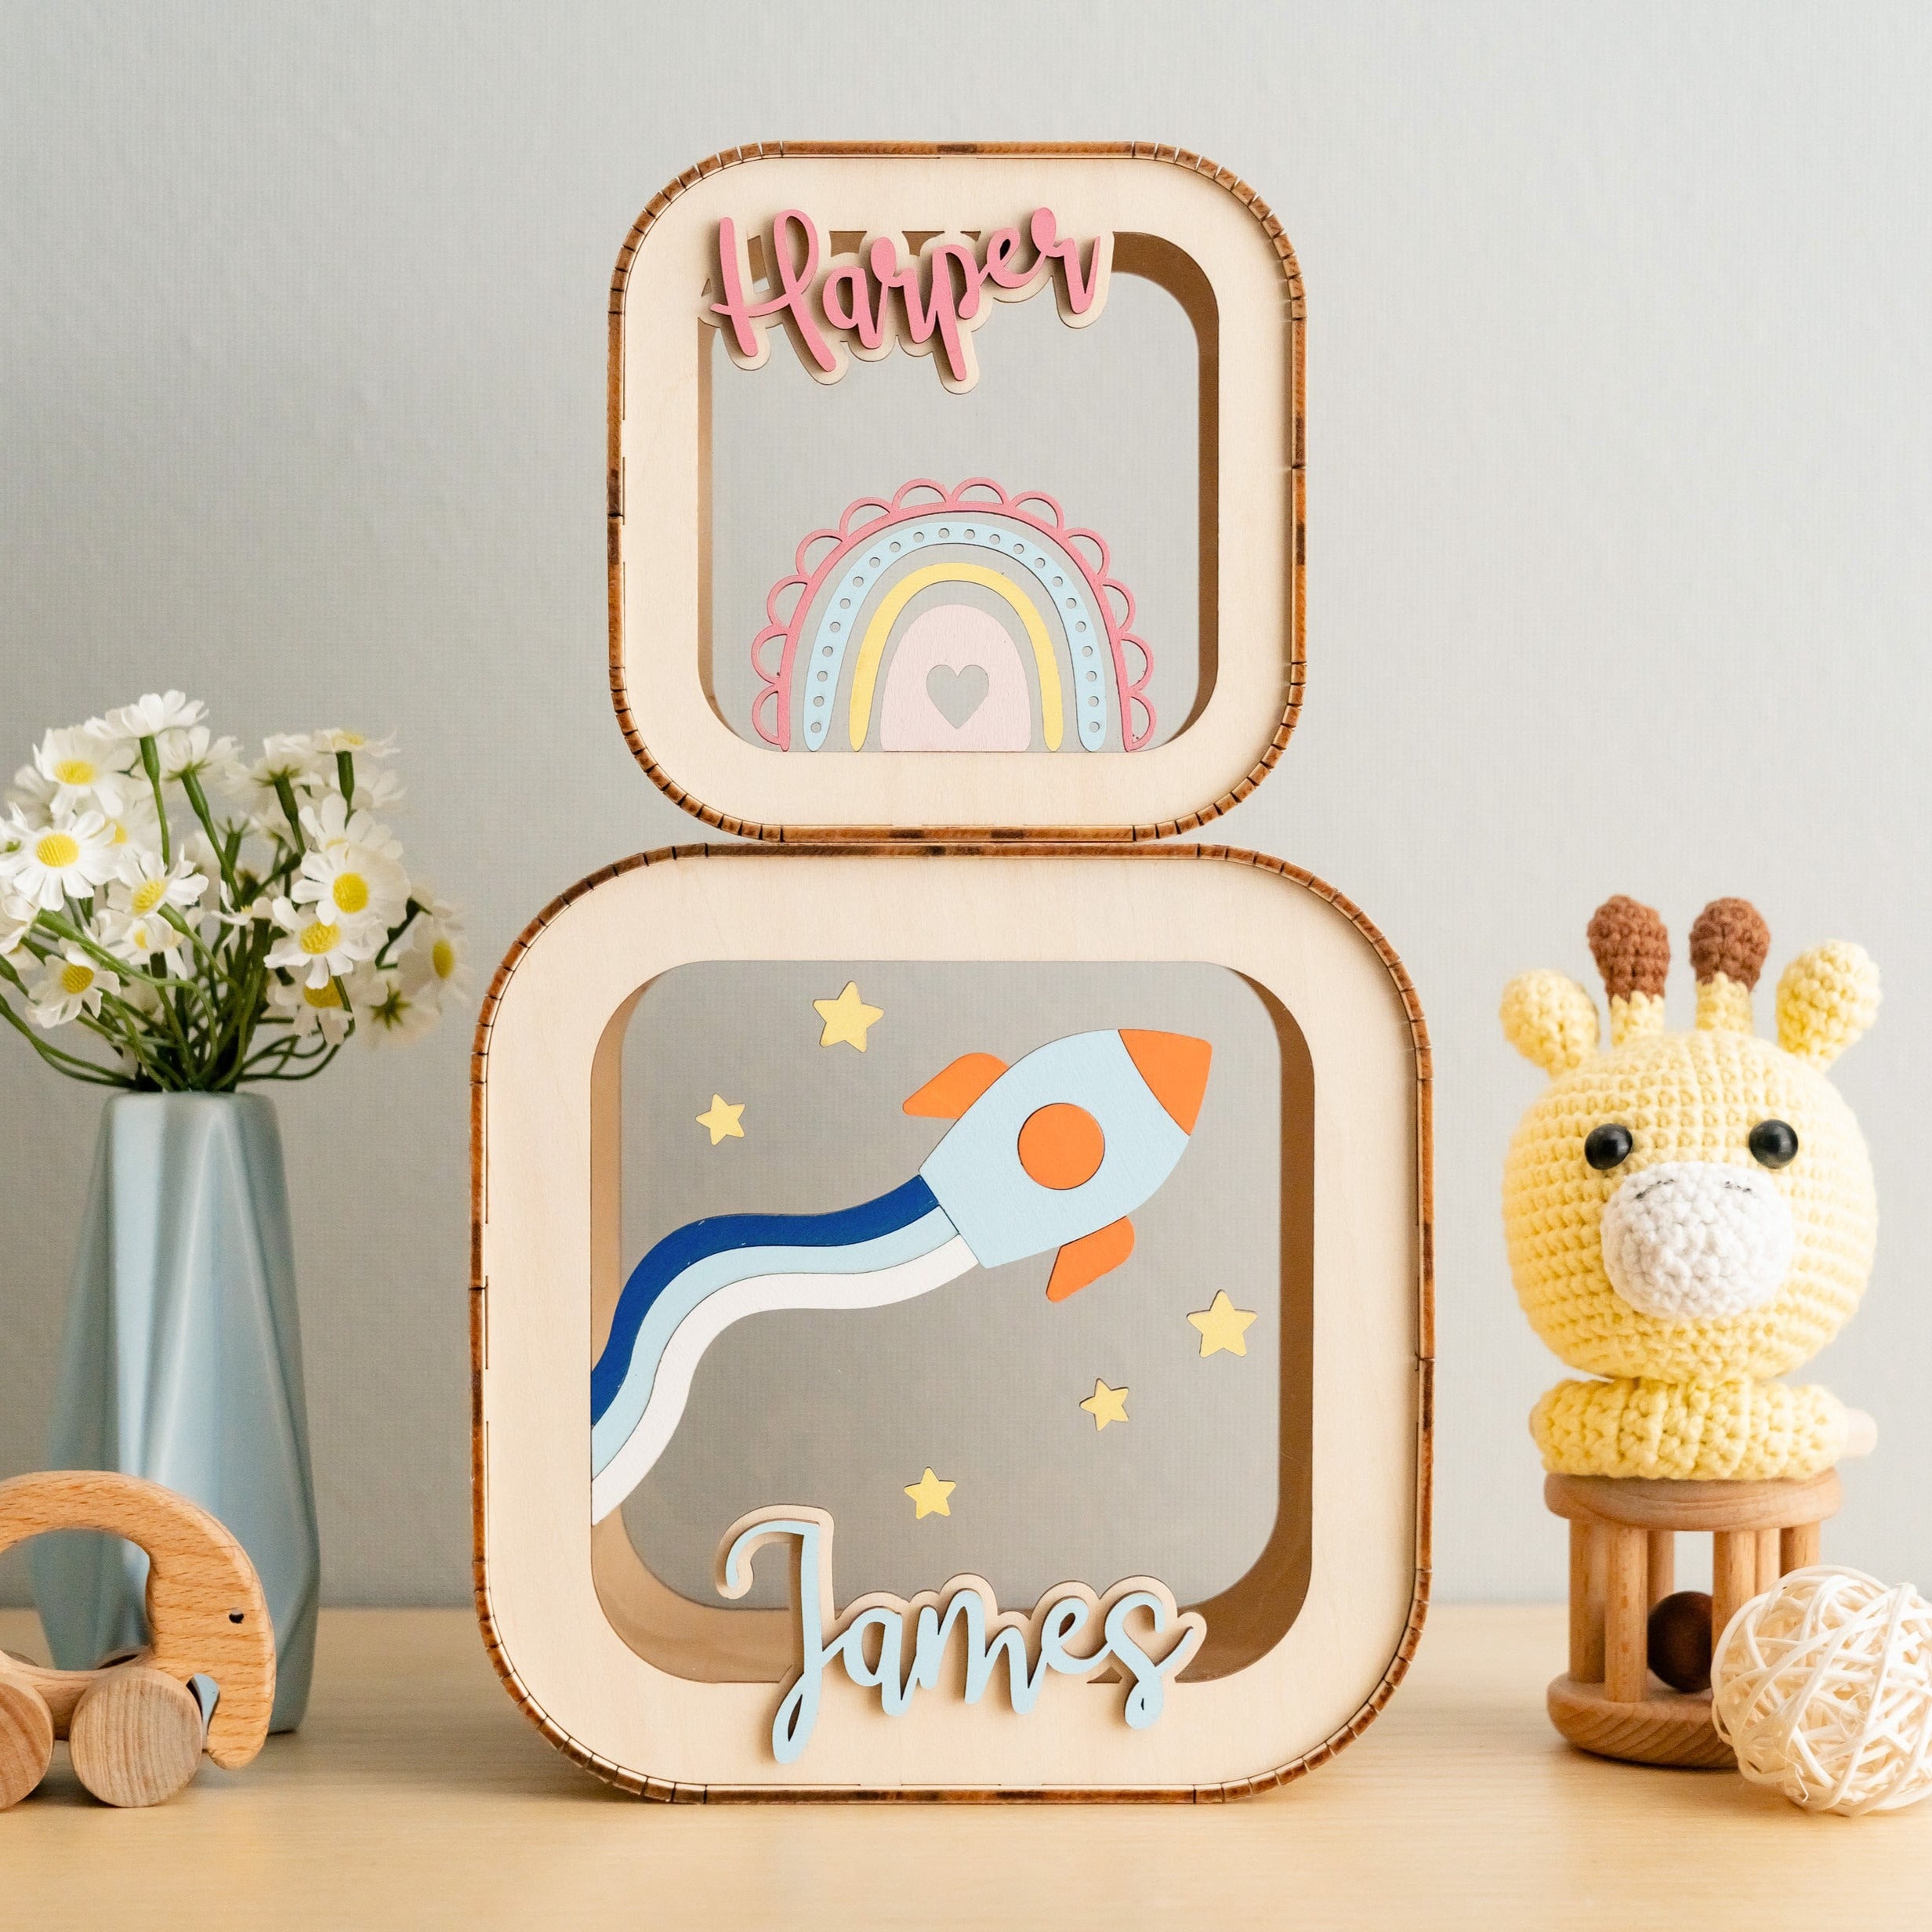 Personalized Wooden Piggy Bank for Stylish Nursery Savings